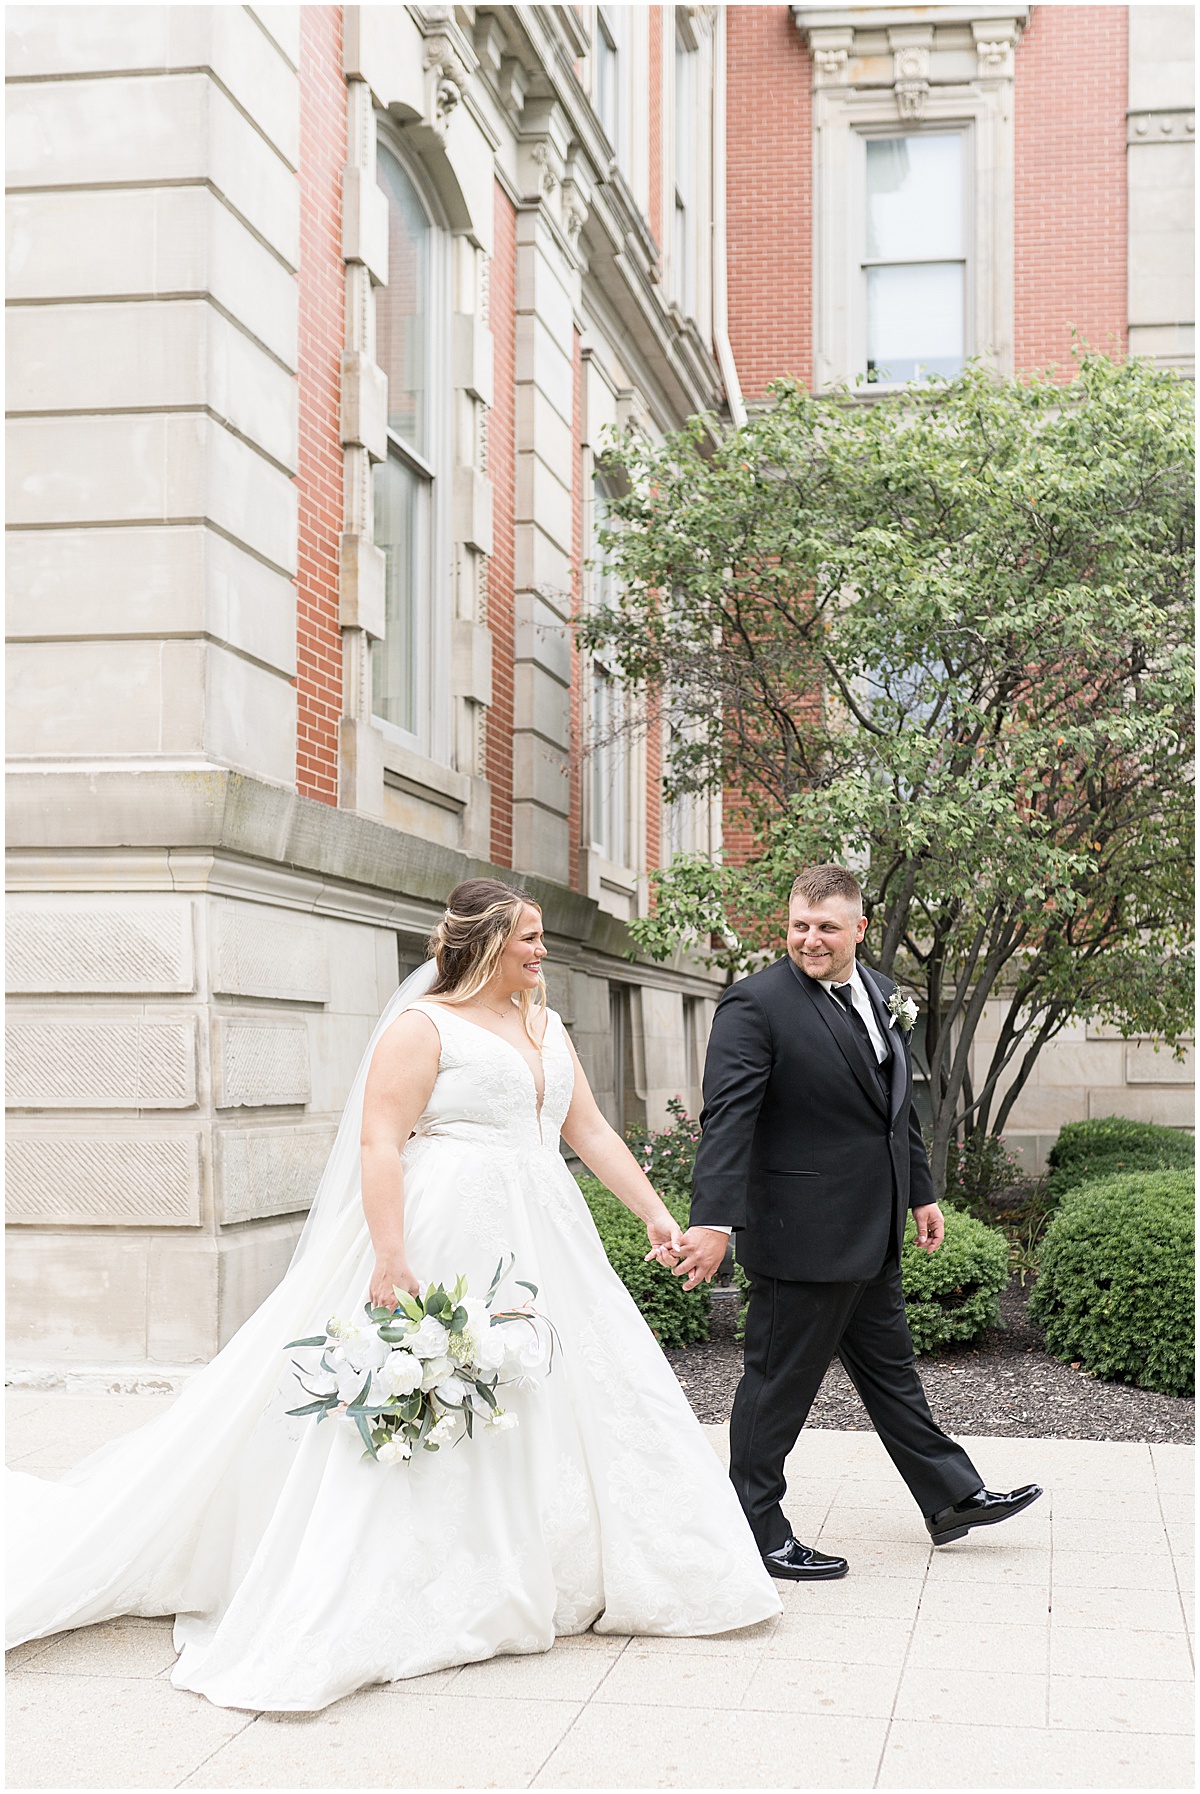 Newlyweds walking during wedding photos at Hamilton County Courthouse in downtown Noblesville, Indiana 